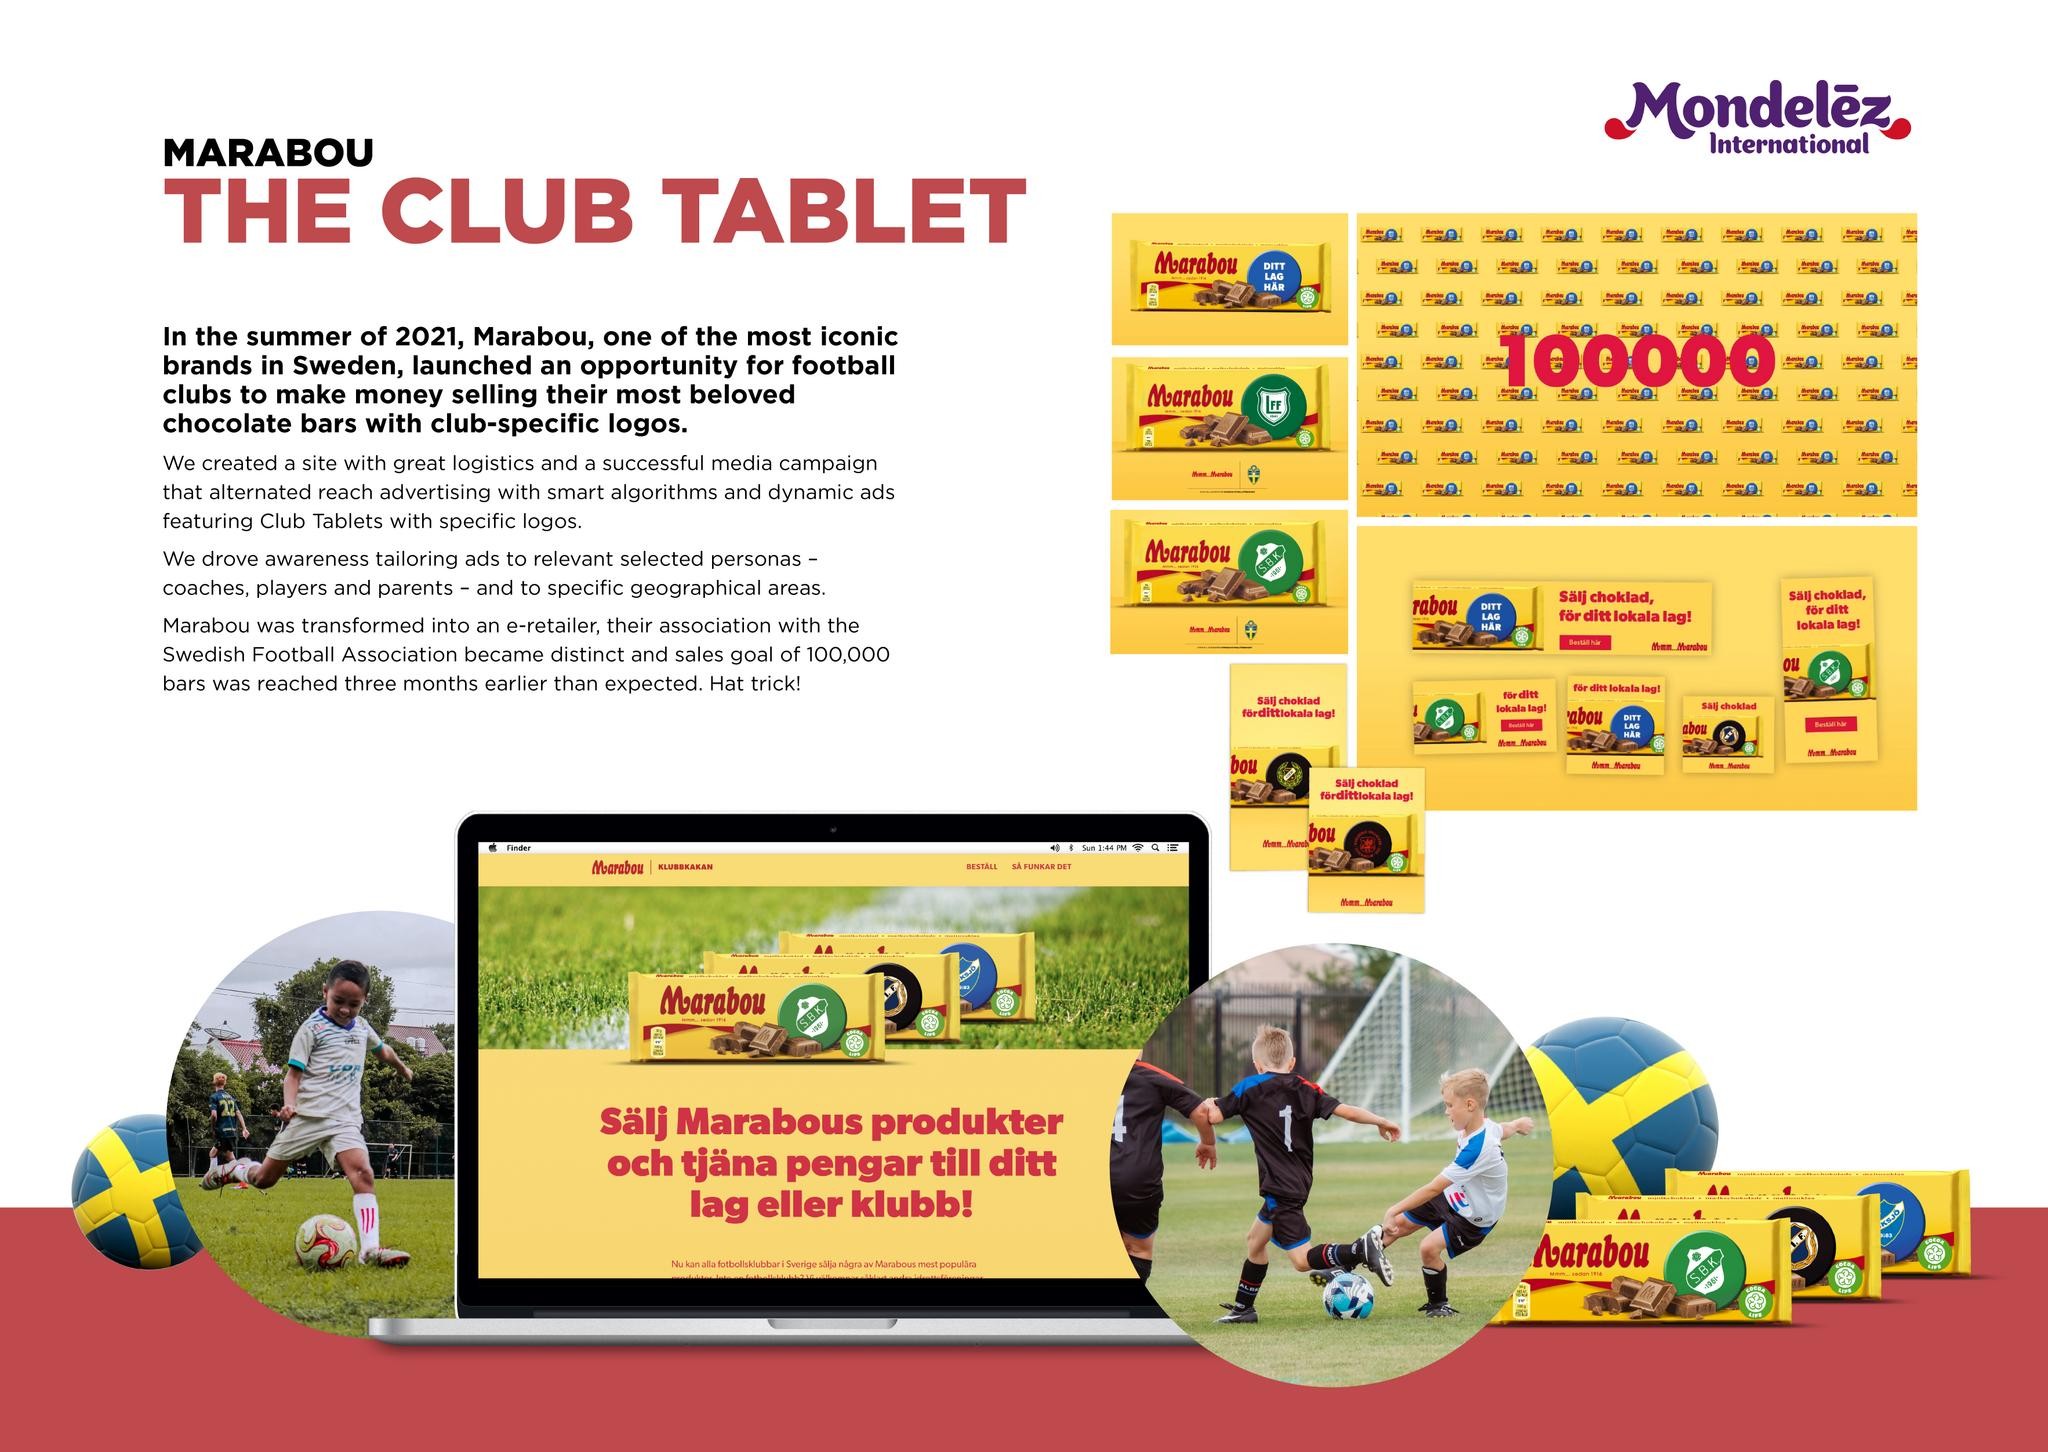 The Club Tablet